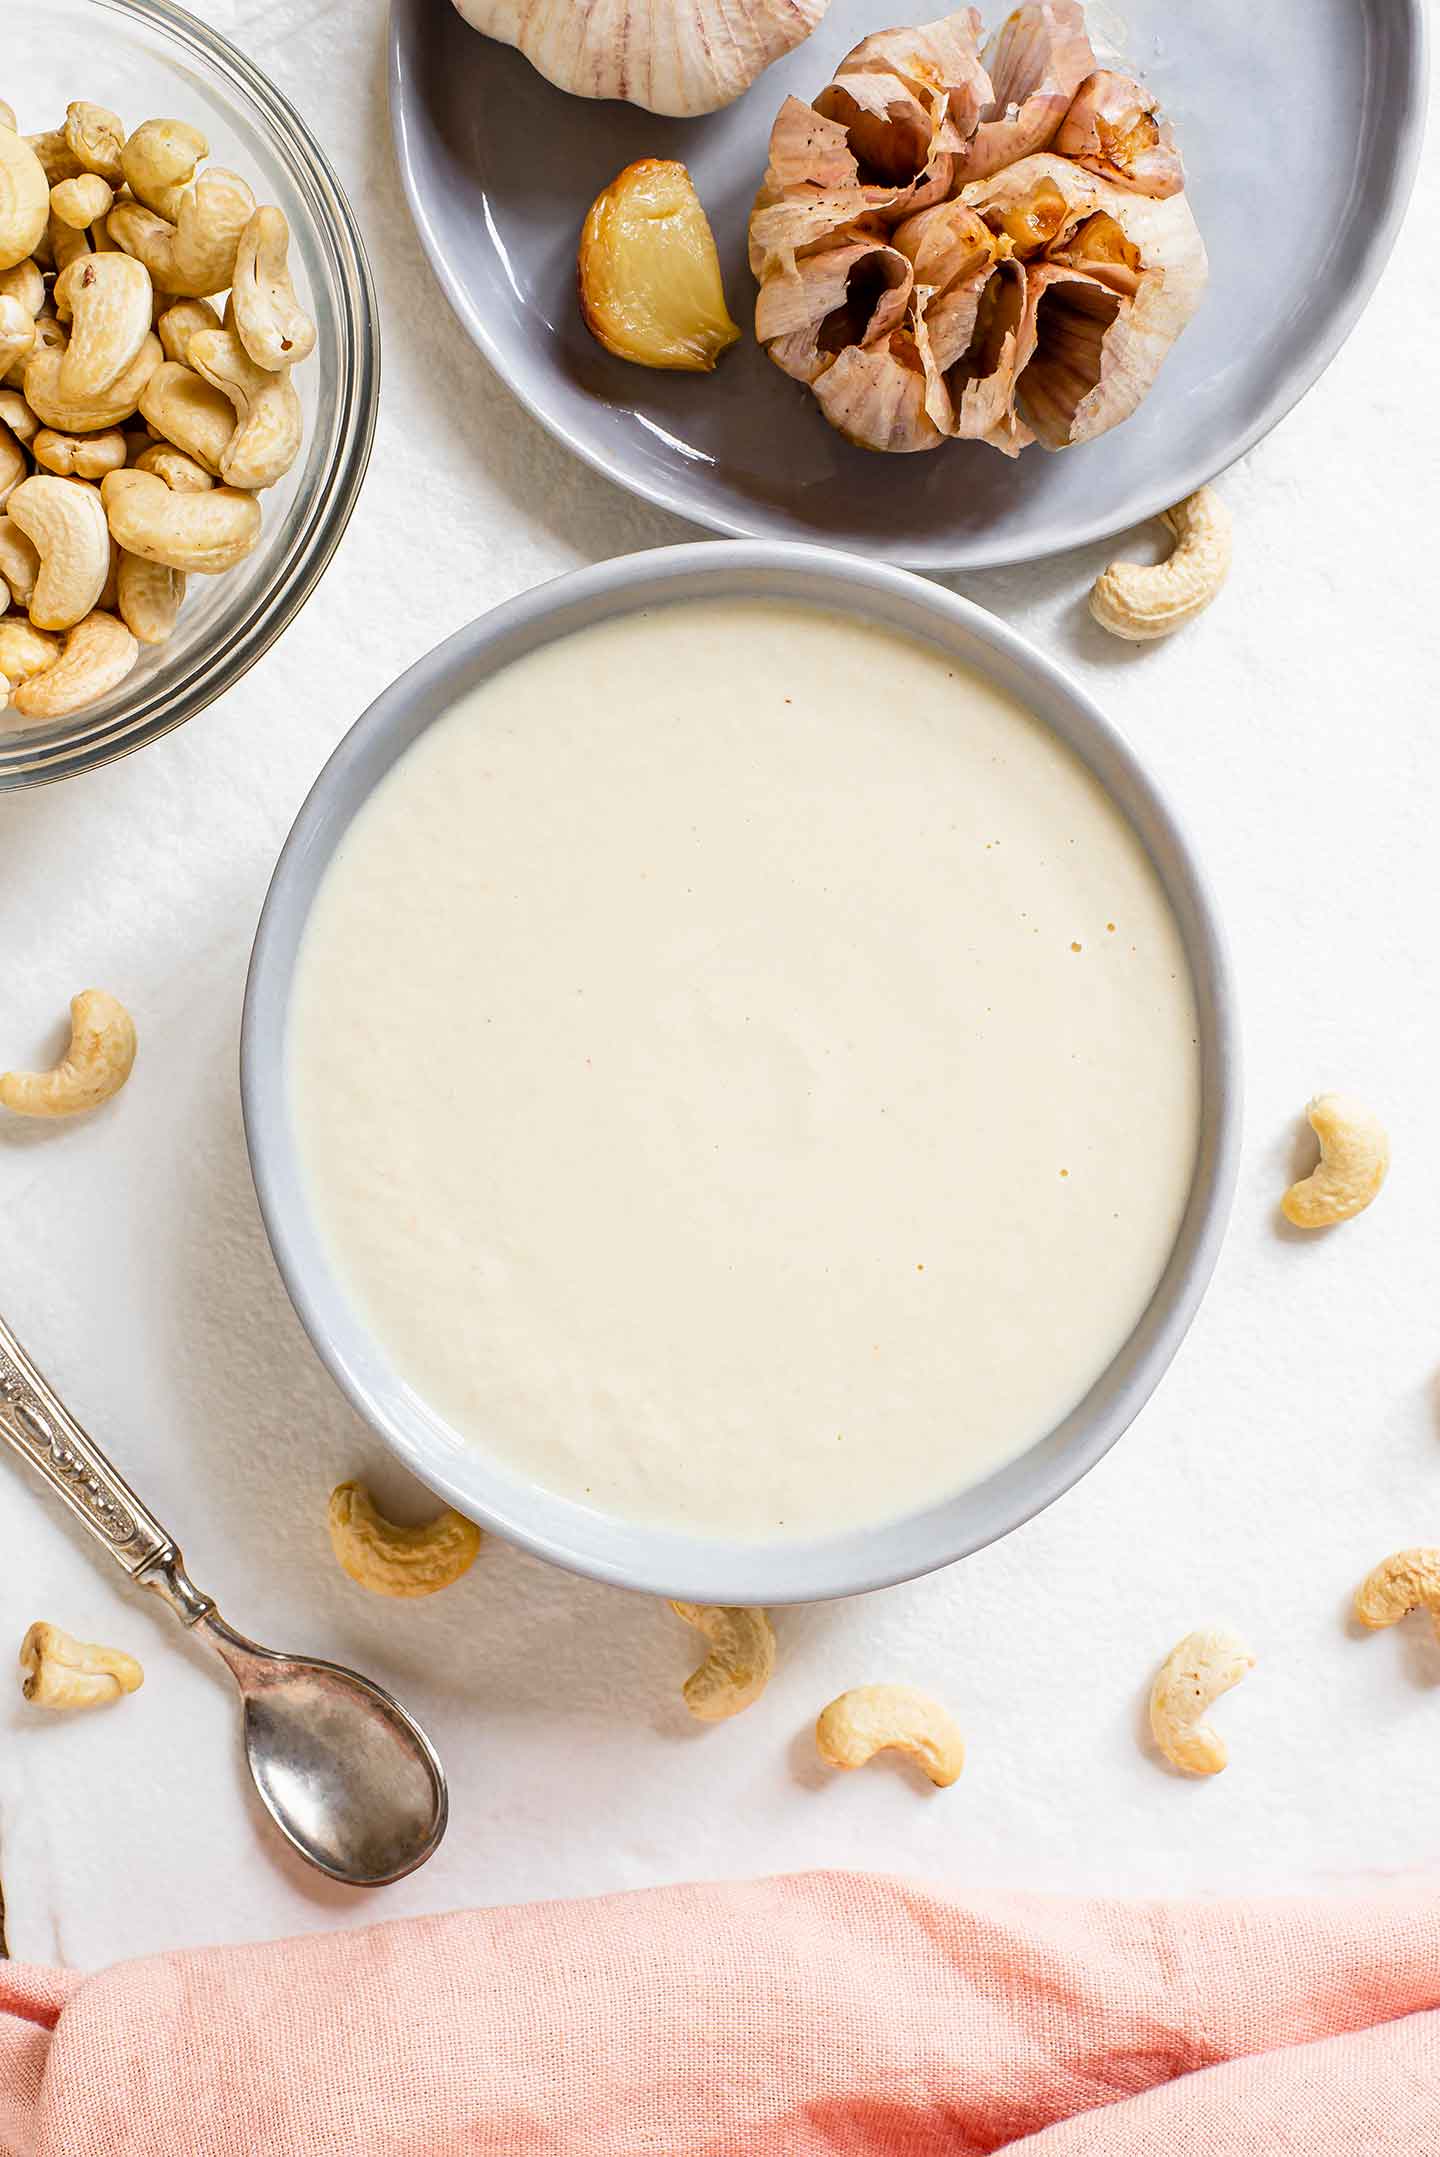 Top down view of the creamy white sauce in a shallow dish surrounded by raw cashews and roasted garlic.